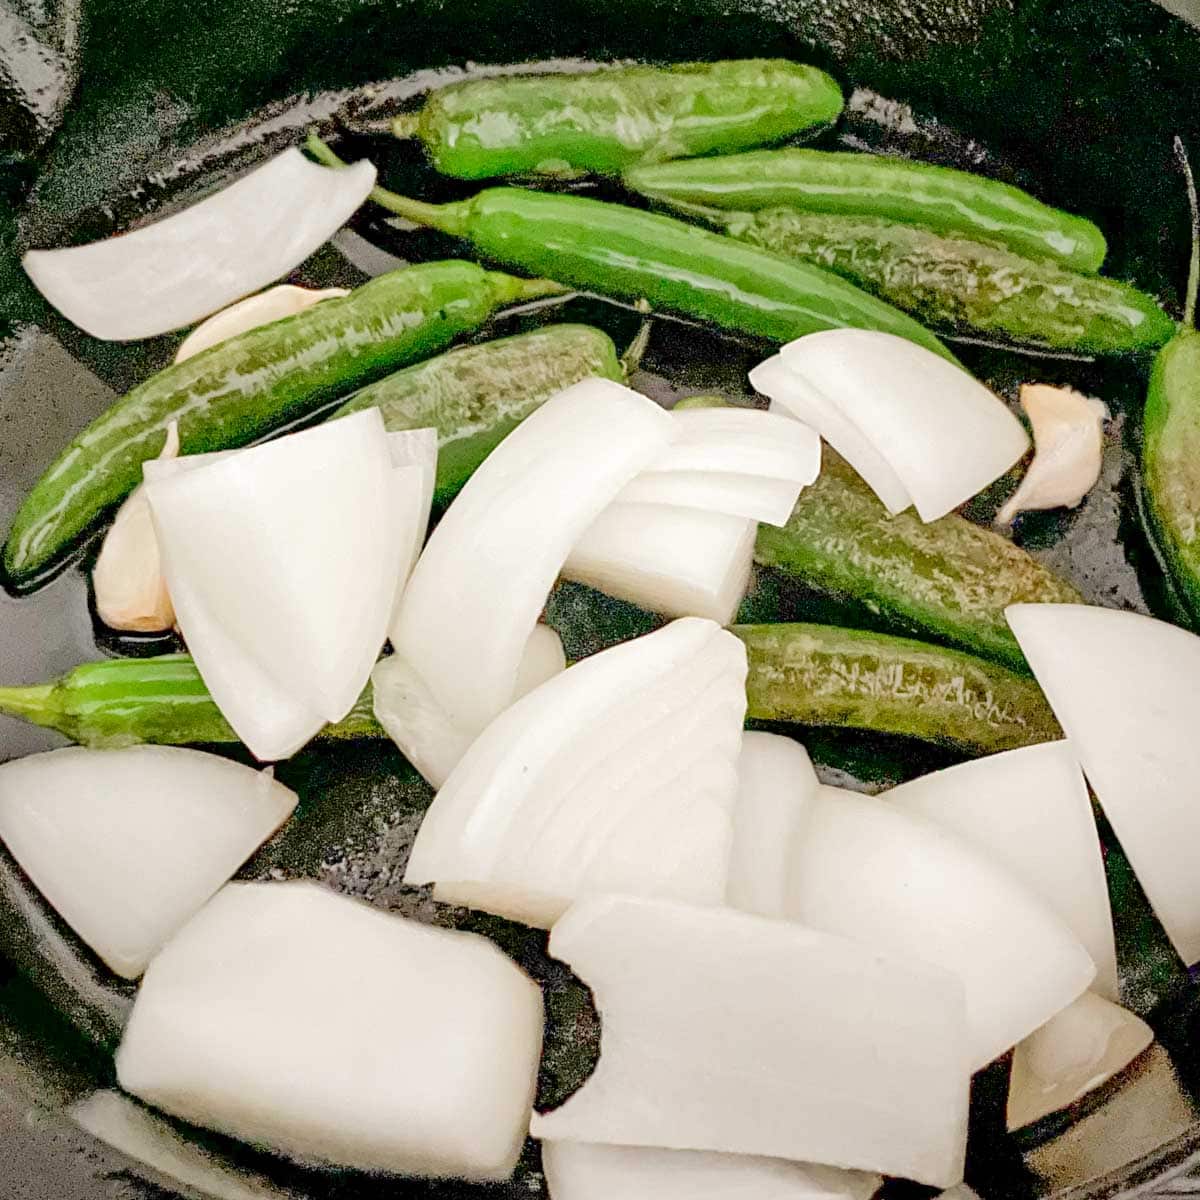 Serrano, onion, and garlic is shown roasting in a cast iron skillet.